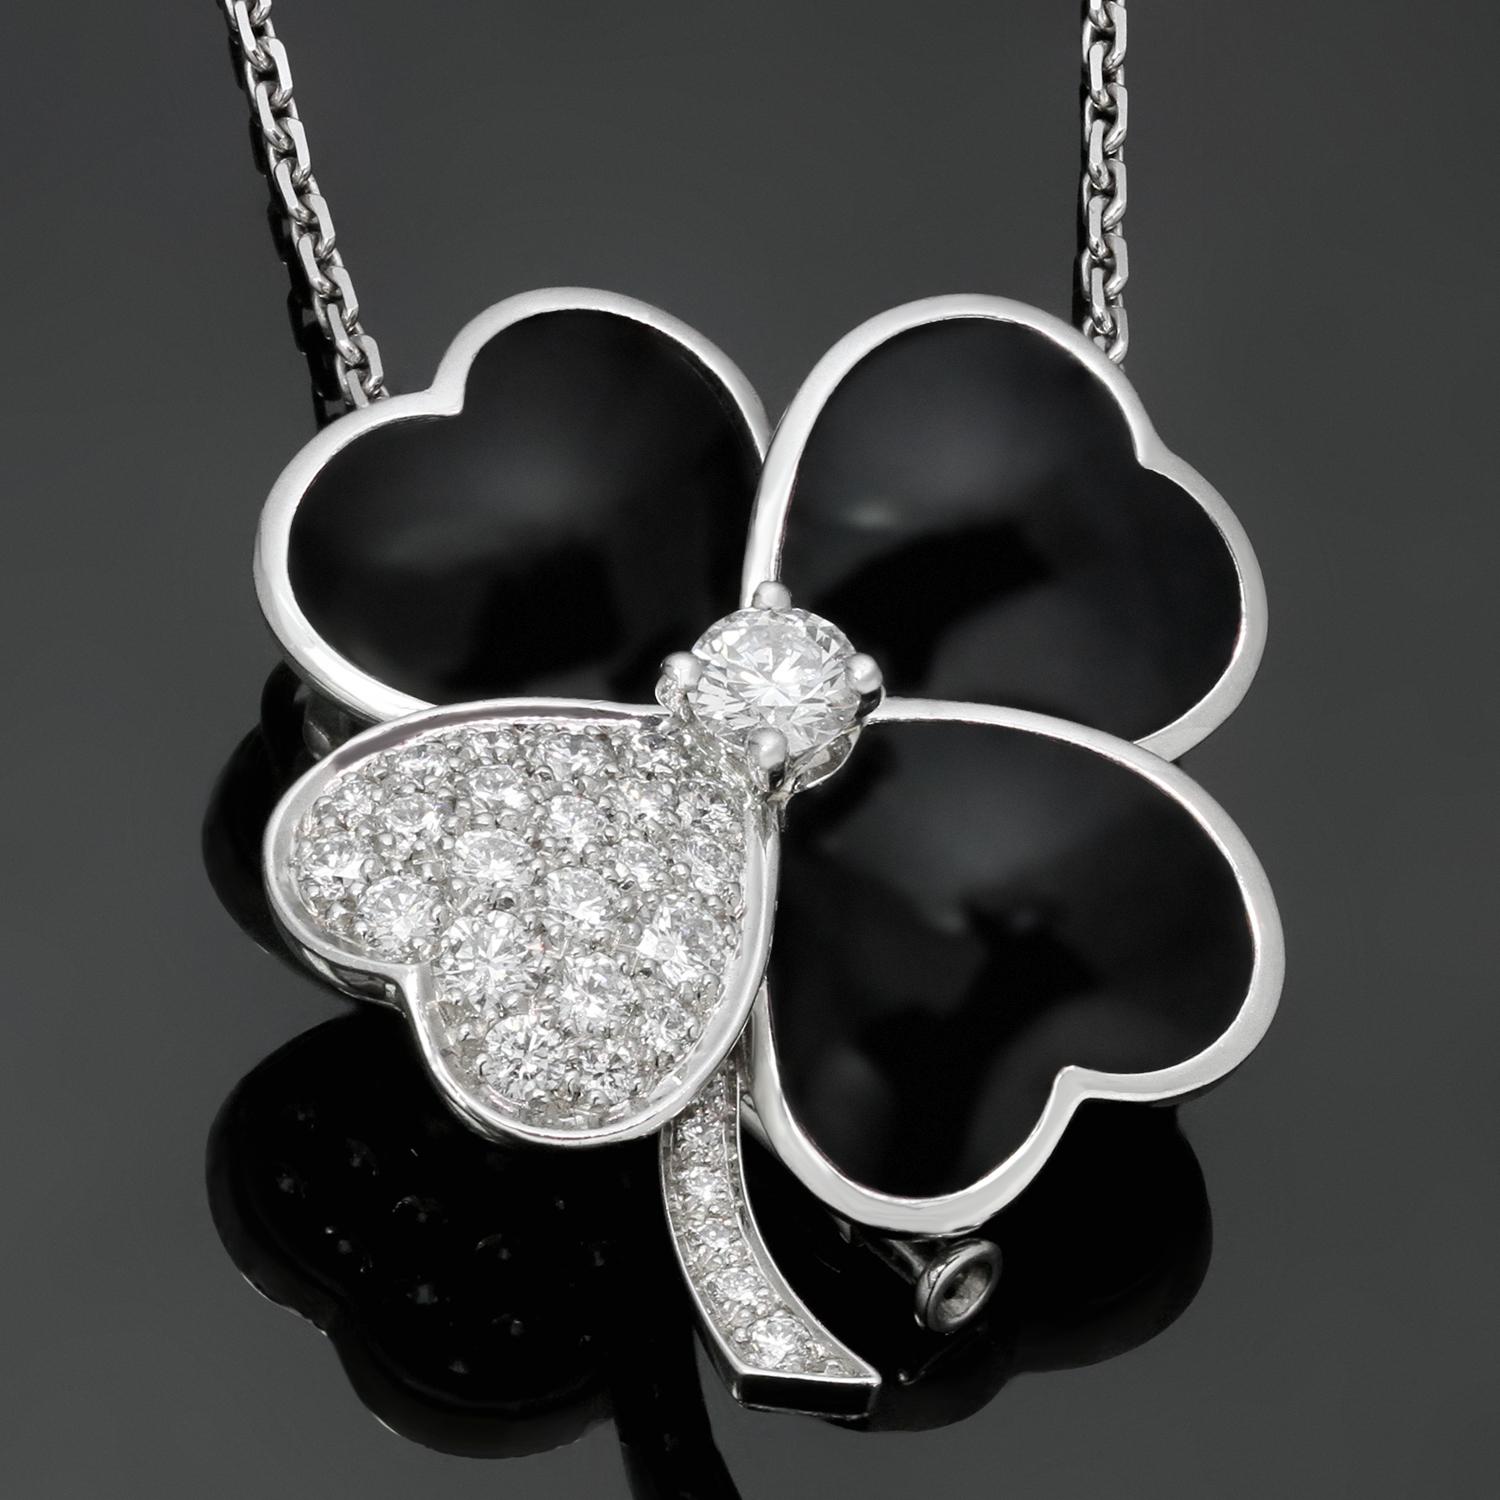 The enchanting Cosmos collection is inspired by VCA's signature flower designs. This gorgeous necklace is crafted in 18k white gold and features a flower-shaped pendant which also be worn as a brooch prong-set brilliant-cut diamond in the center